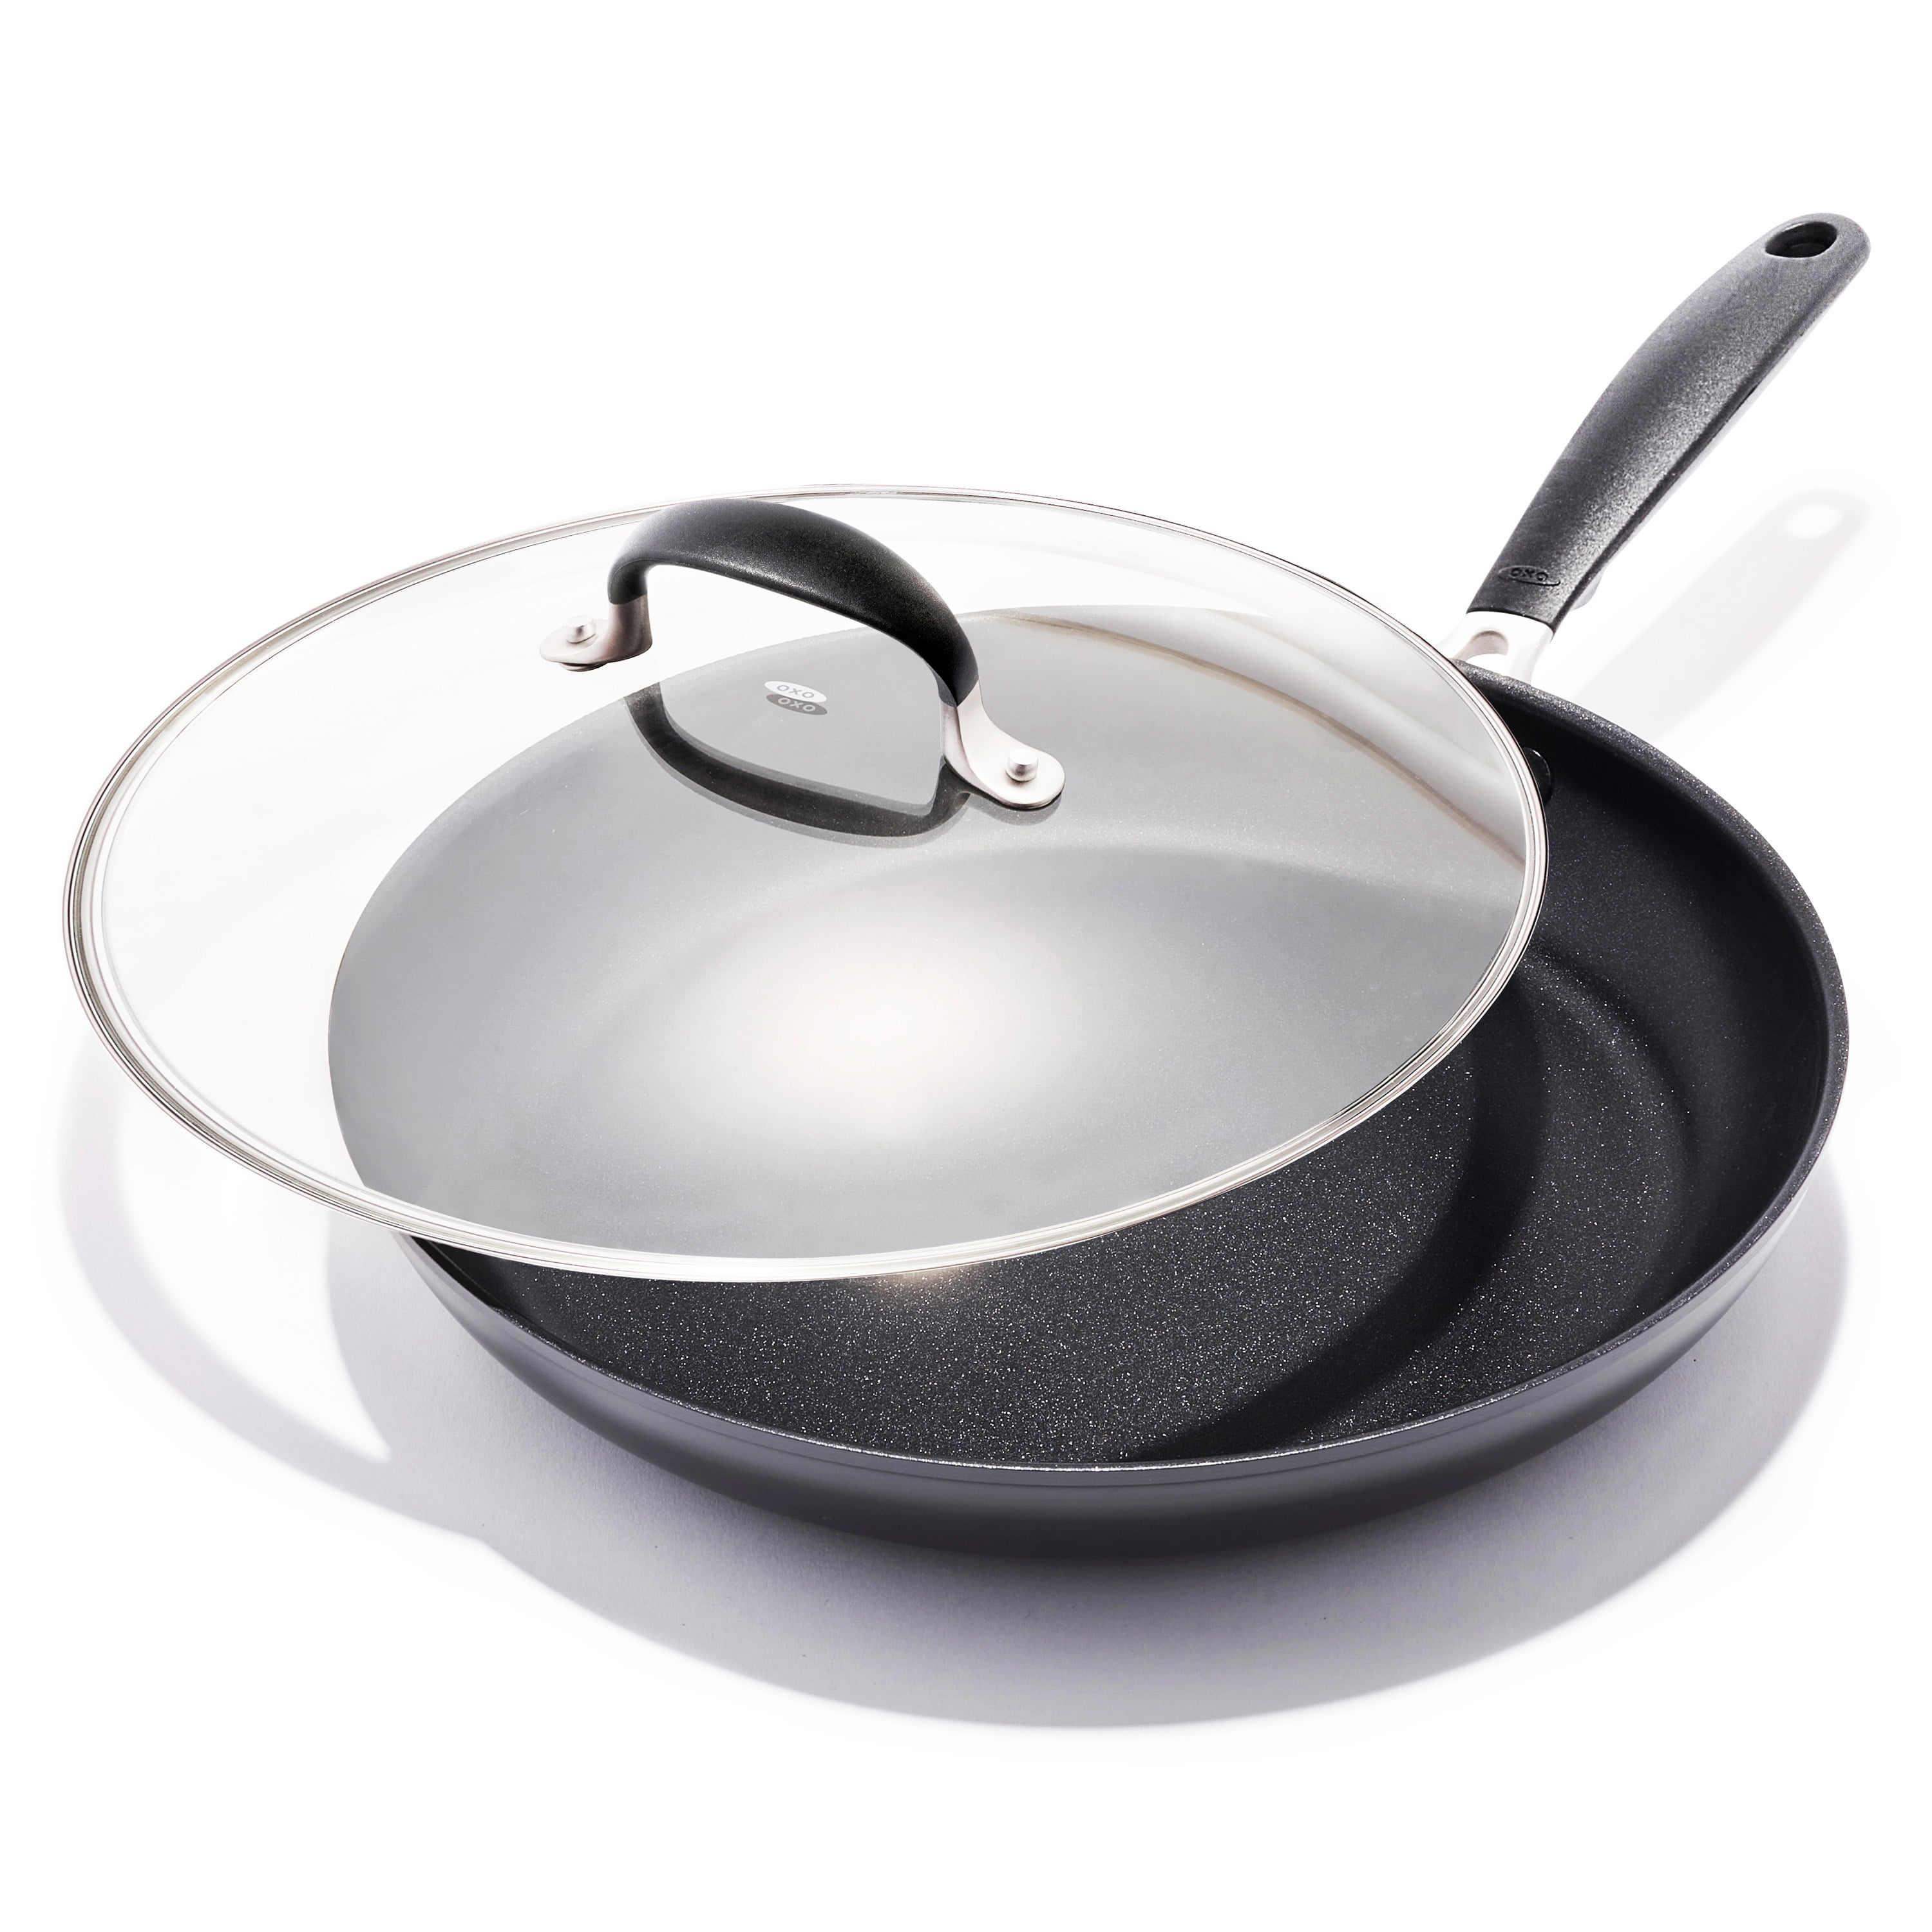  Vinchef Nonstick Frying Pan With Lid, 10 Inch Chef's